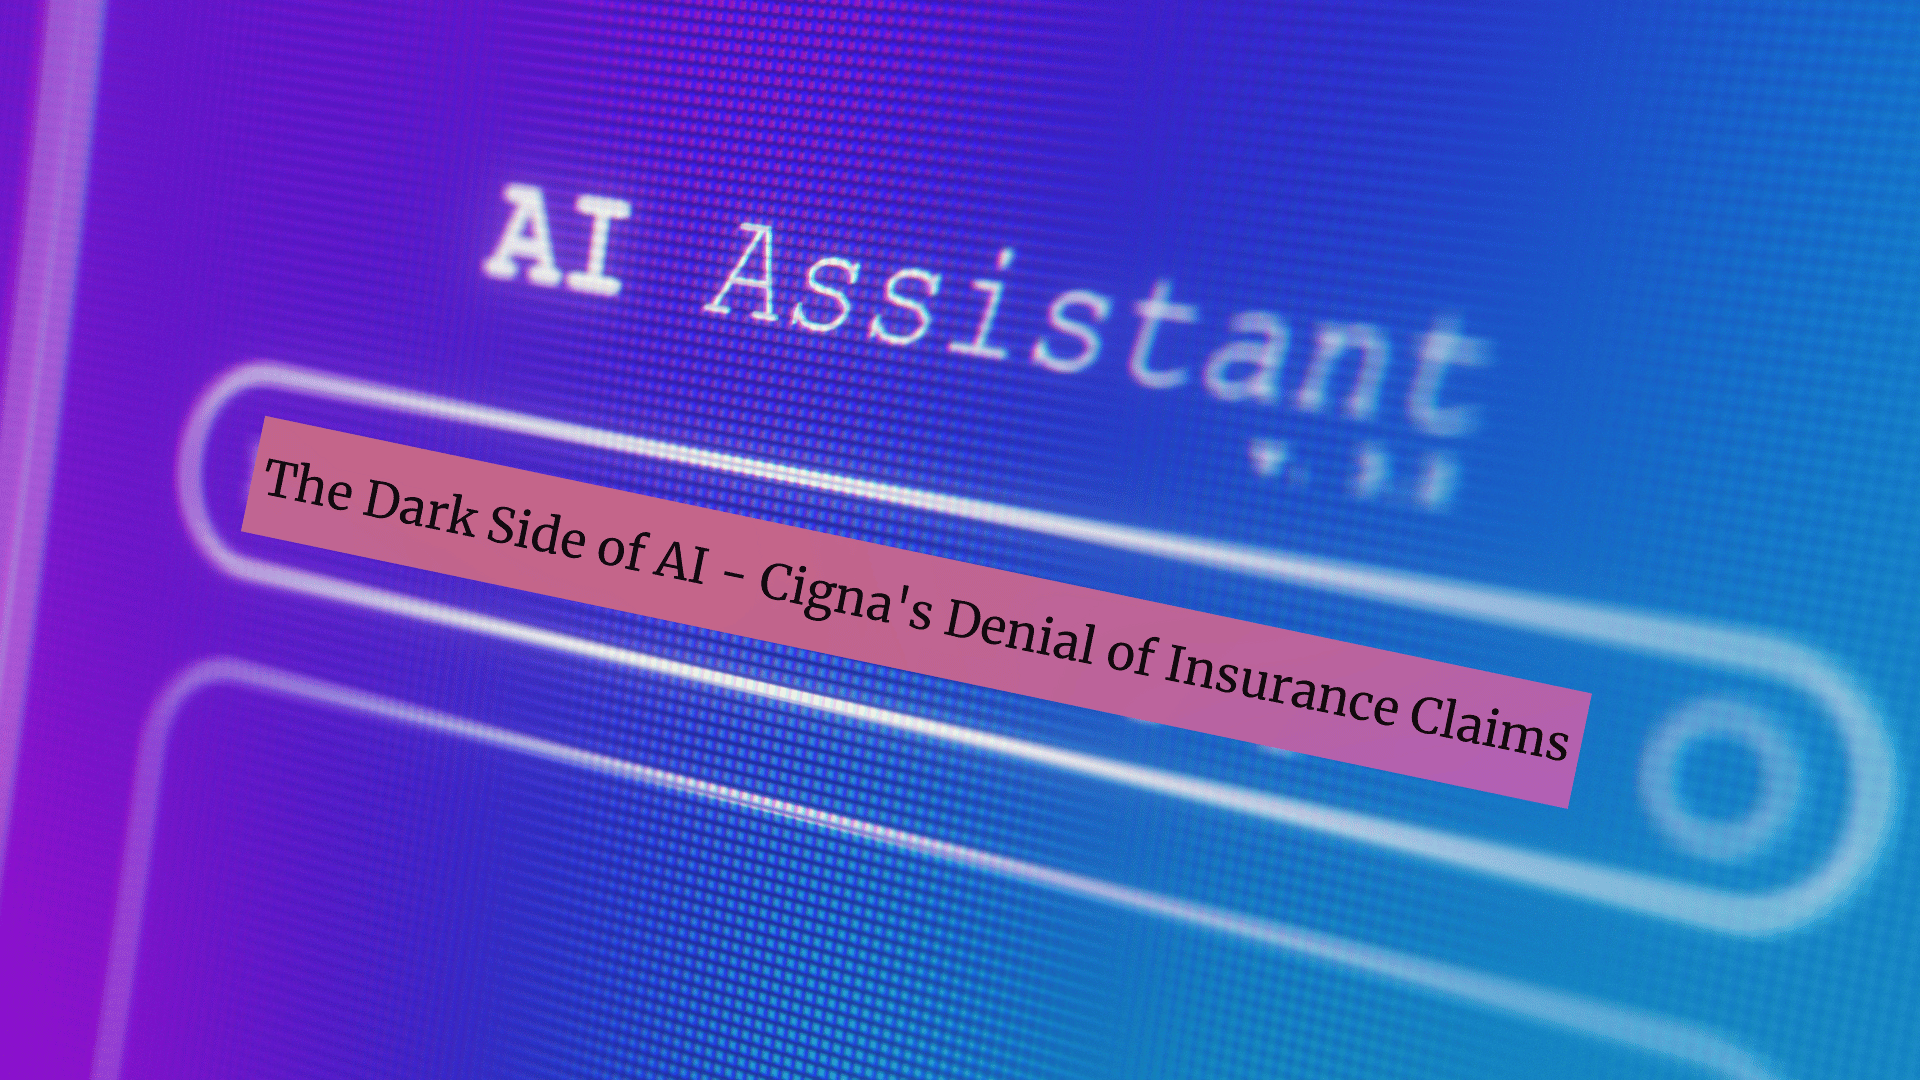 How AI Kills - Cigna's Use of AI in Denying Insurance Claims